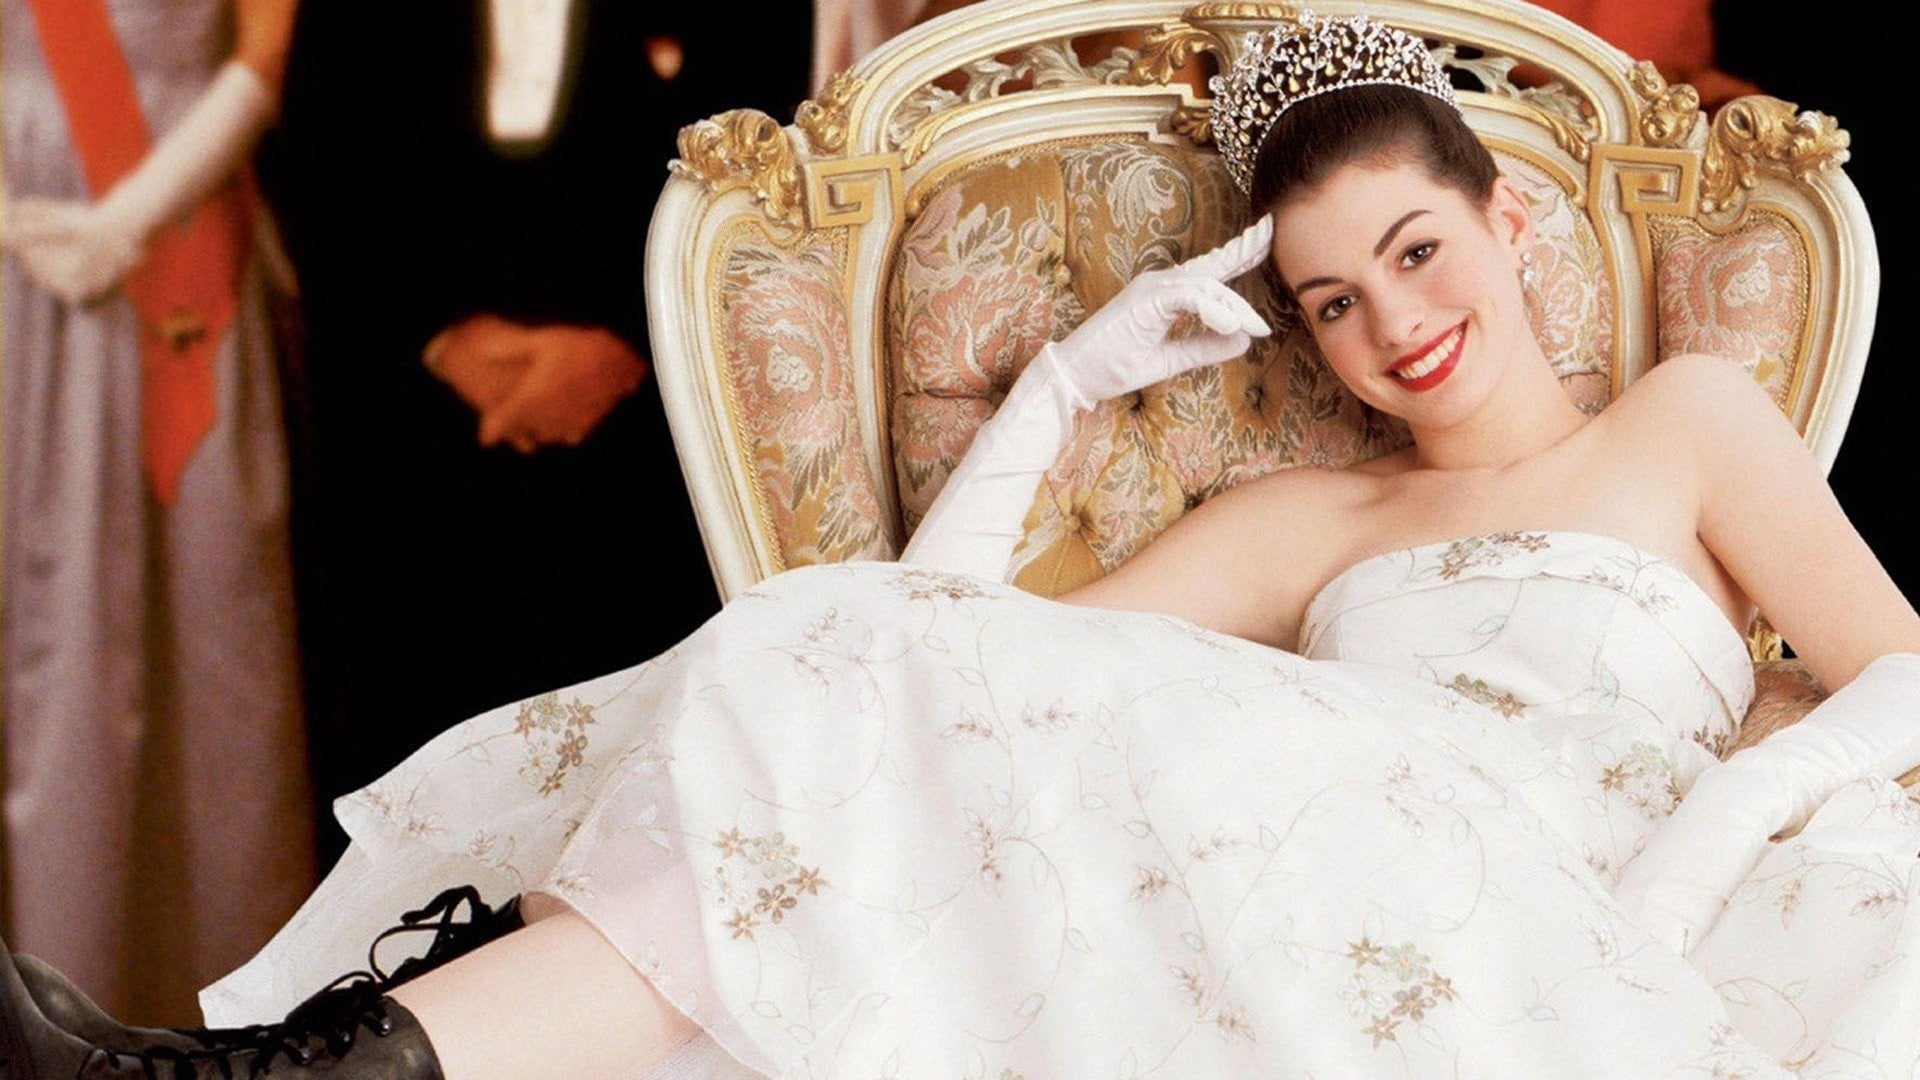 Anne Hathaway Growing Campus Youth Princess Elegance classic